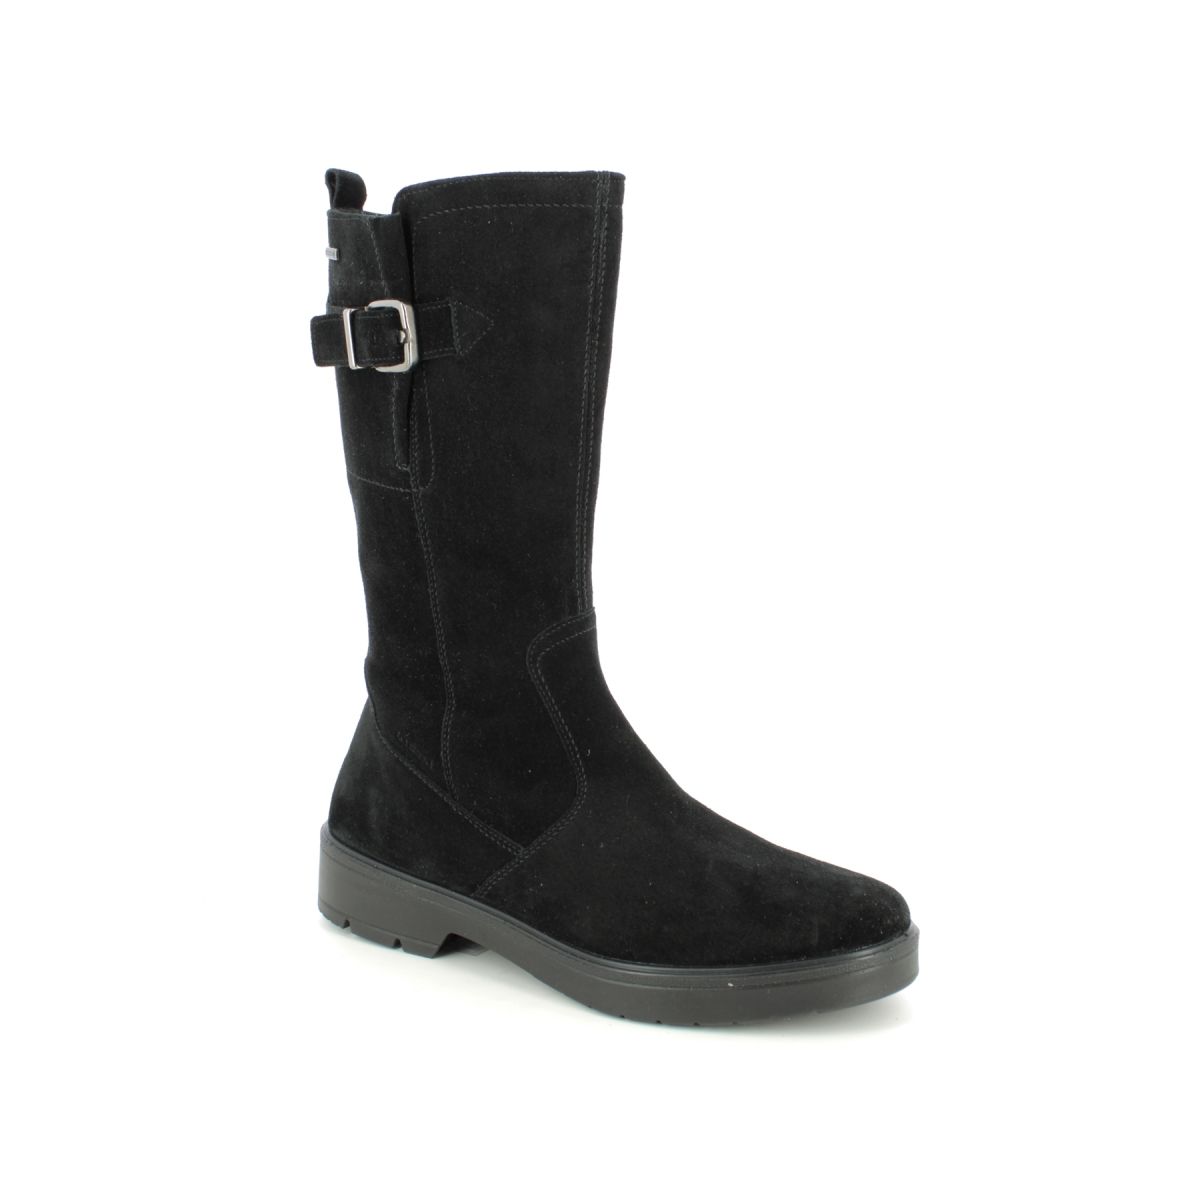 Legero Mystic Mid Gtx Black Suede Womens Mid Calf Boots 2000196-0000 In Size 7 In Plain Black Suede